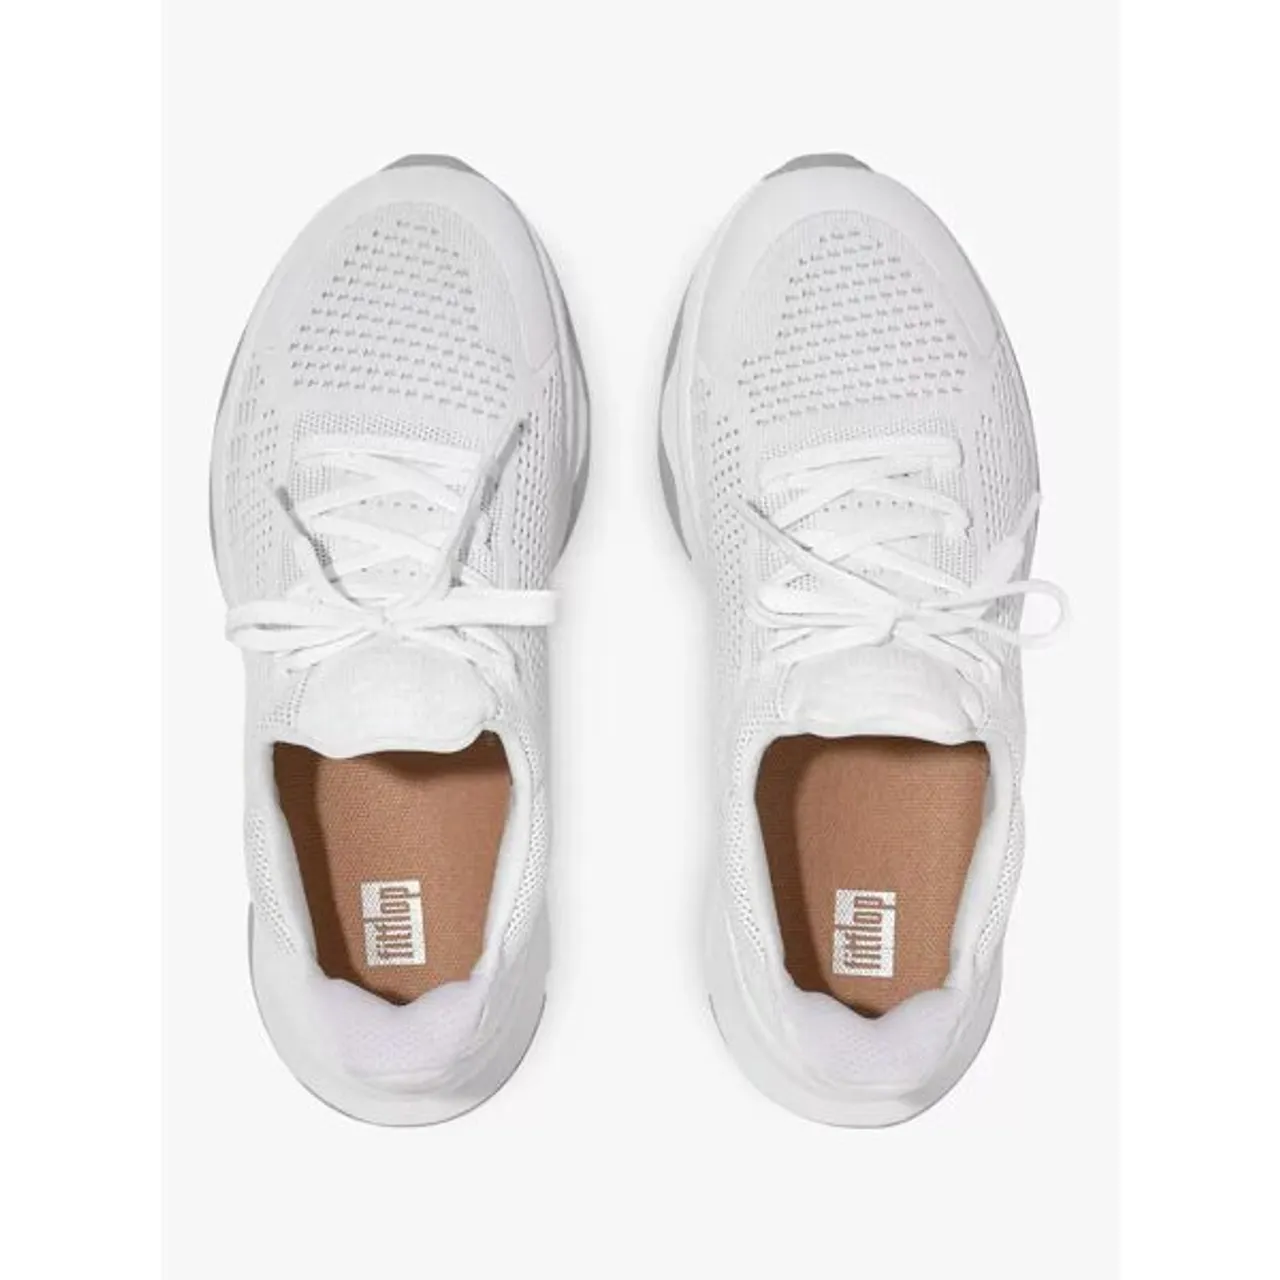 FitFlop Vitamin FFX Lace Up Trainers - Urban White Mix - Female